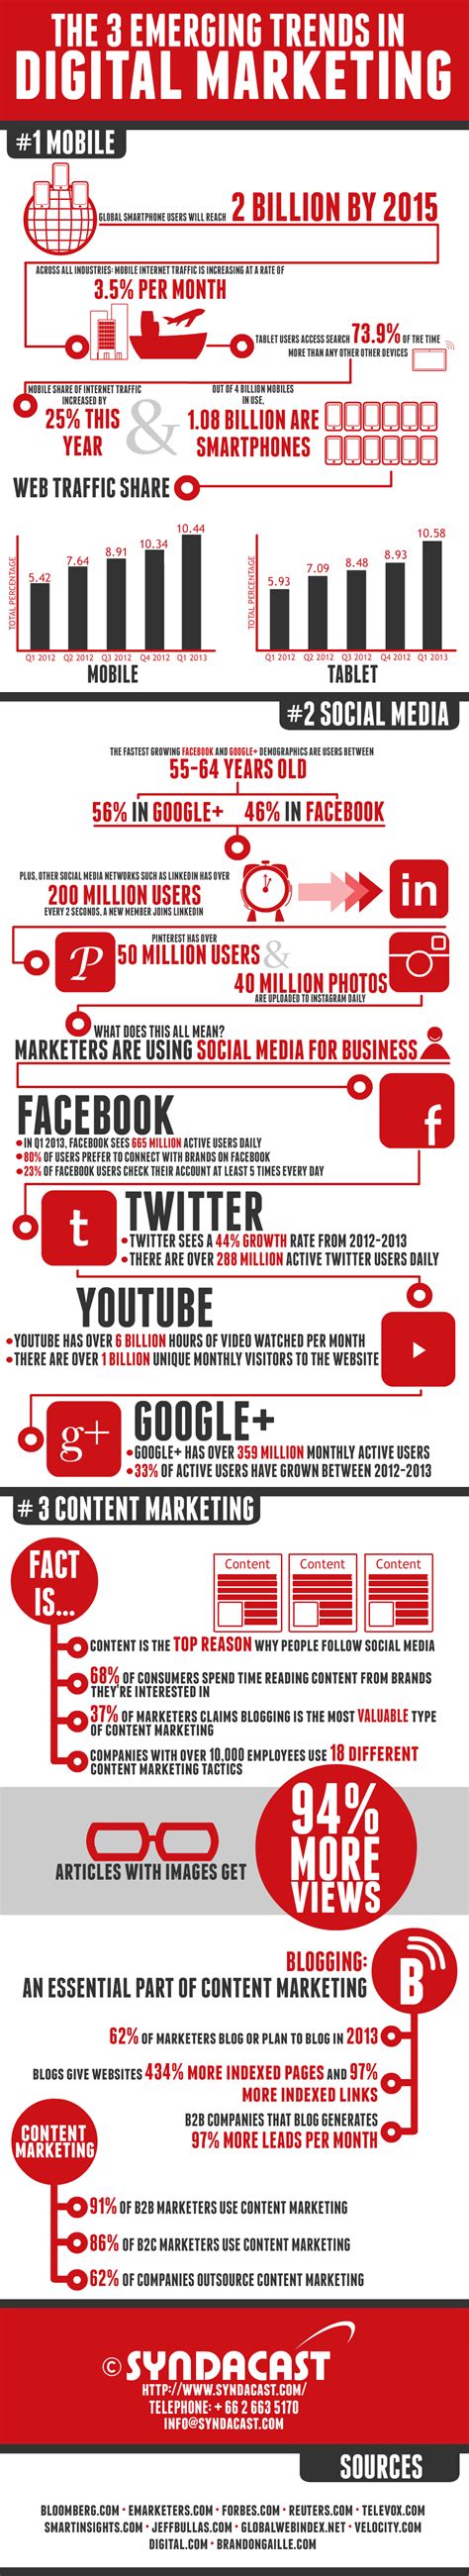 The 3 Emerging Trends In Digital Marketing Infographic